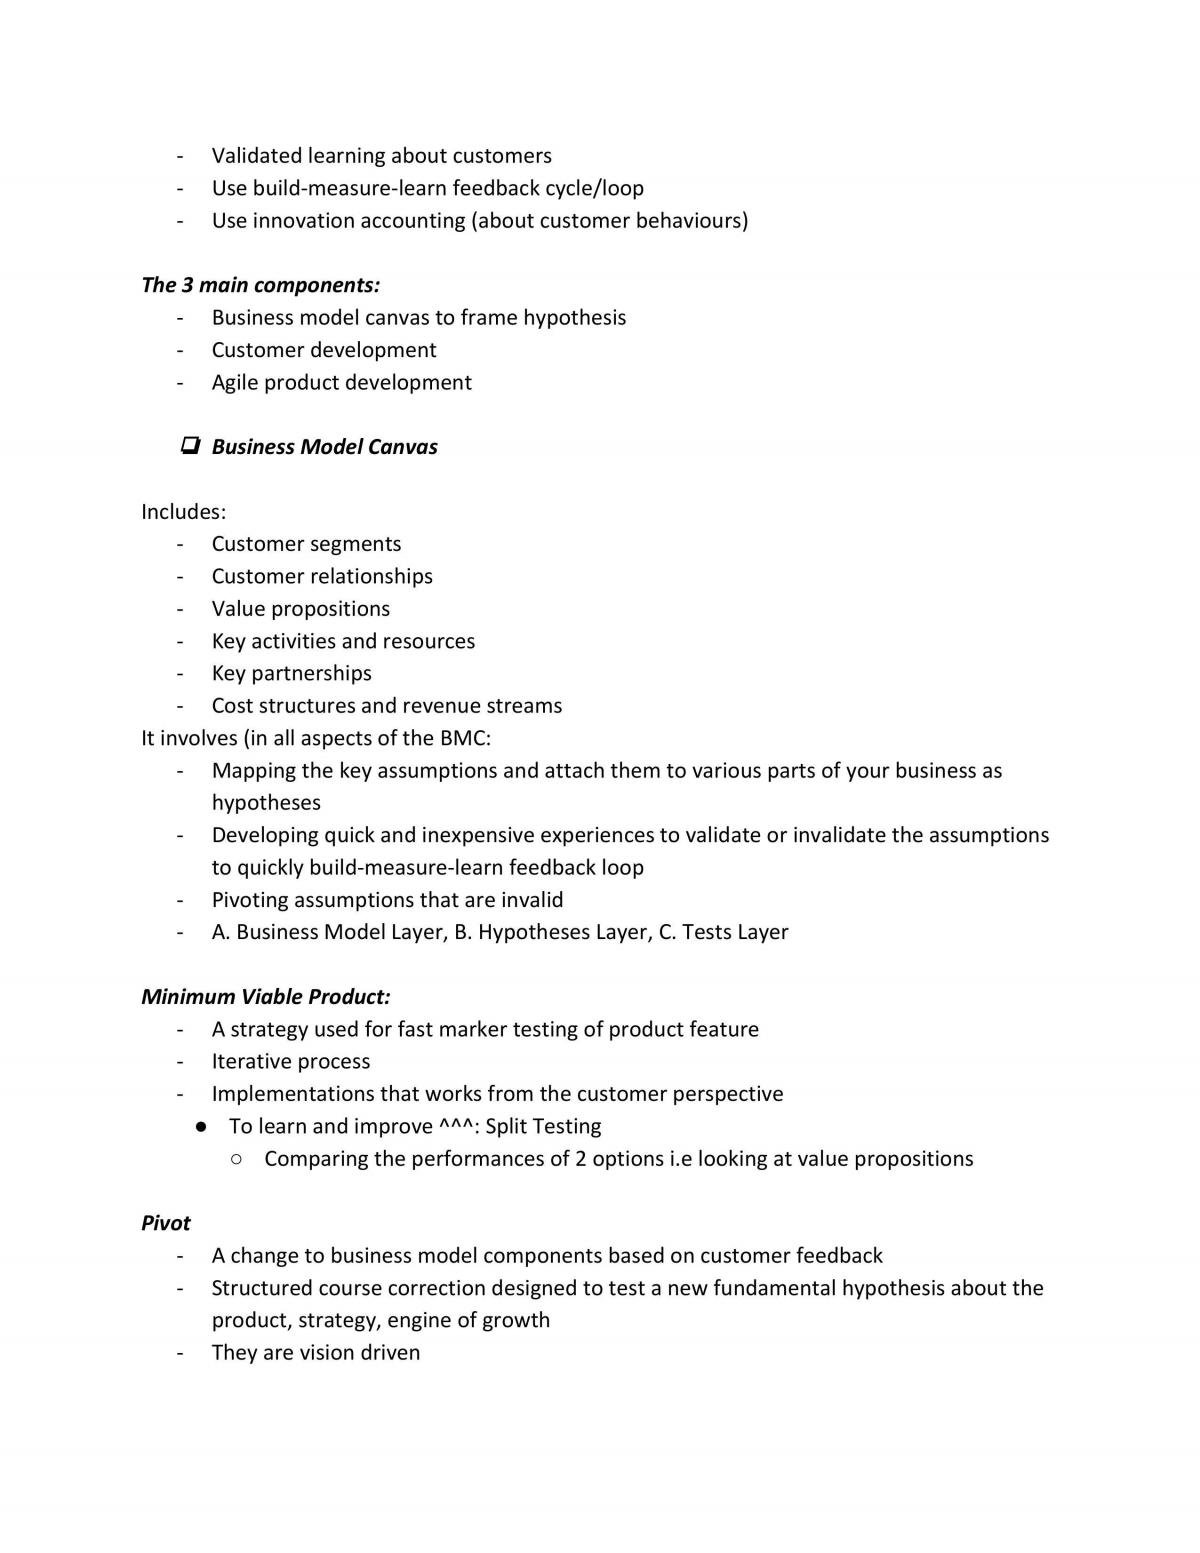 Digital Work Environment complete notes INFS1020 - Page 11